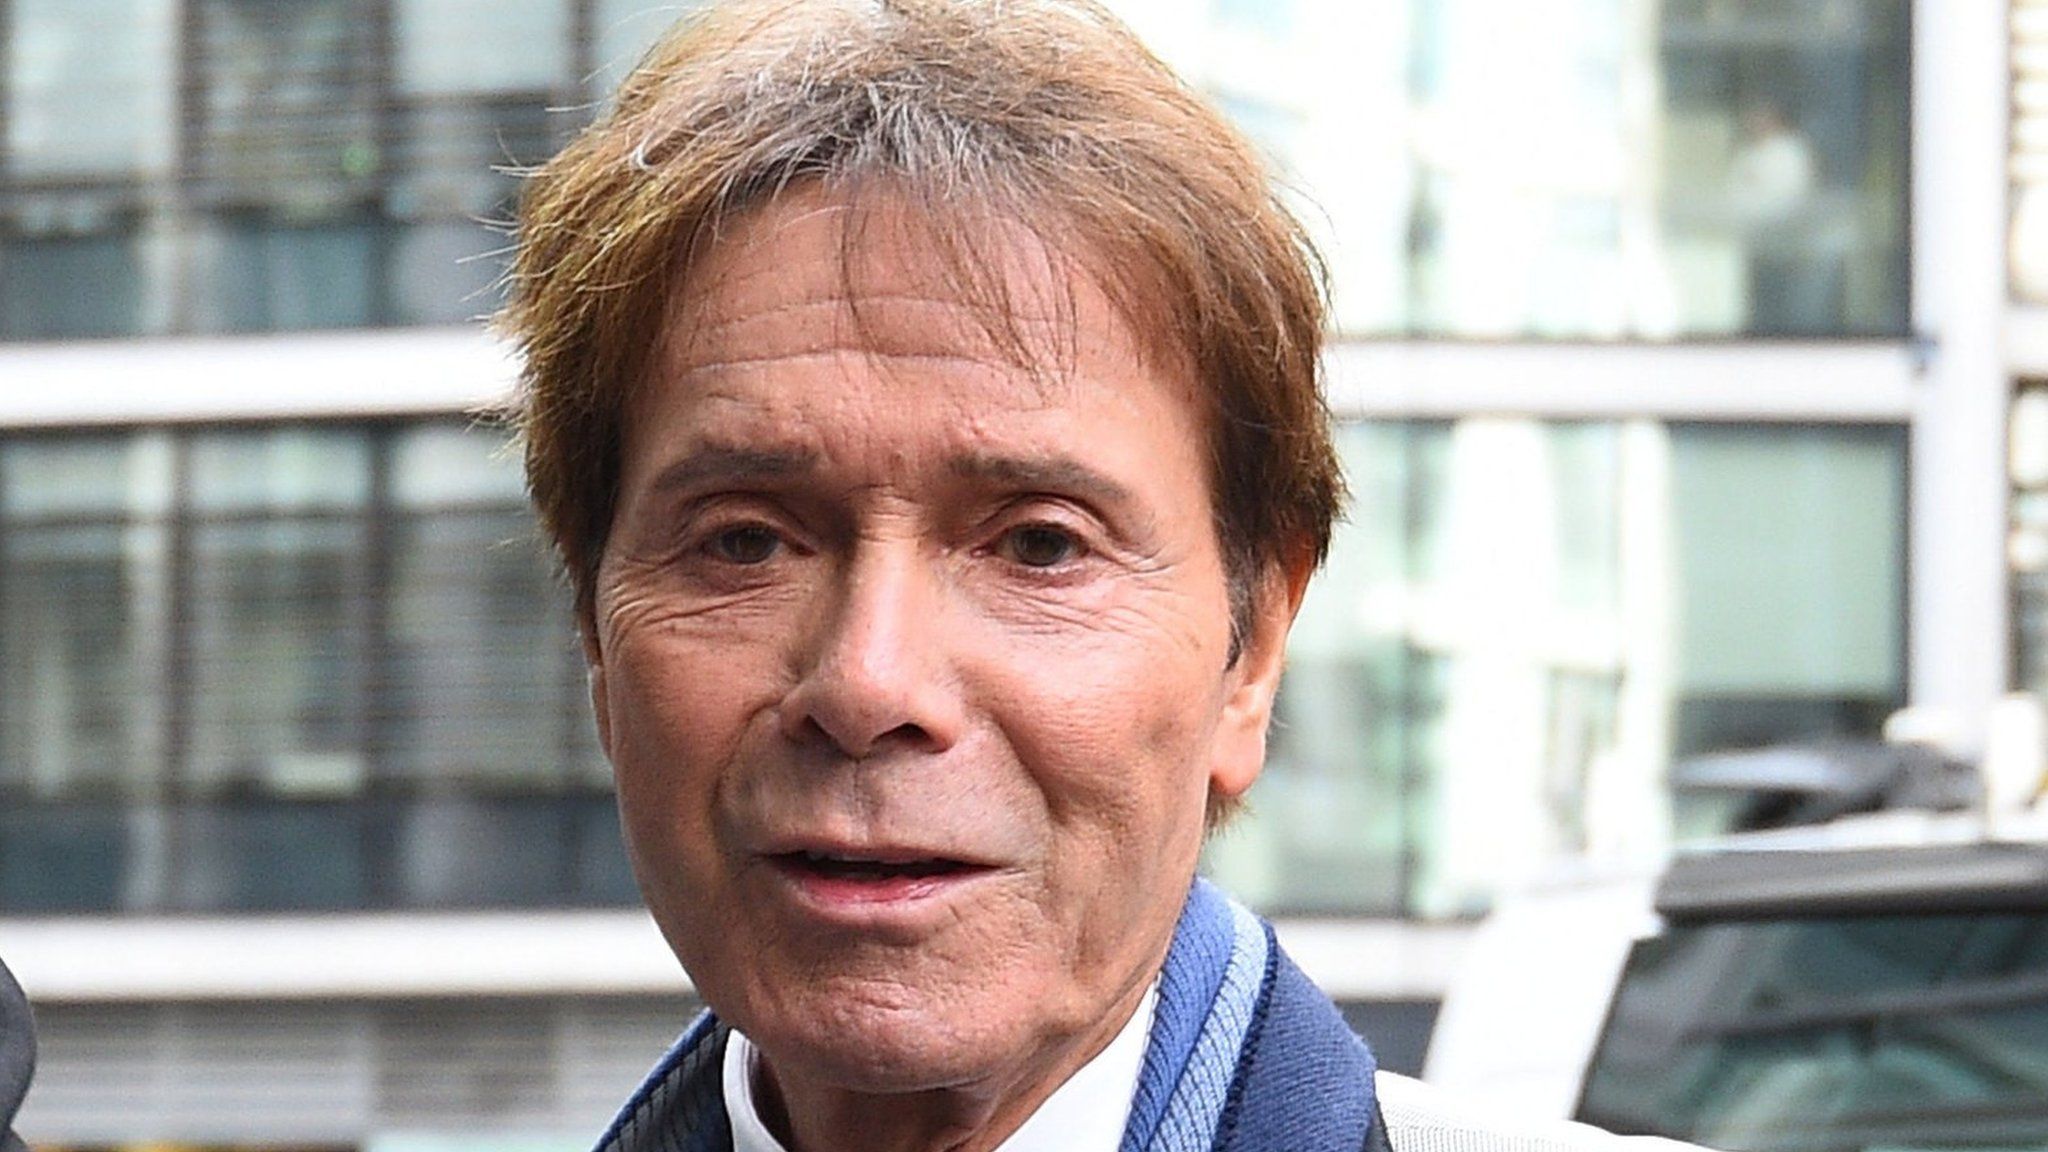 Cliff Richard Bbc Report Sparked Conspiracy Theories Lawyer Says Bbc News 4160